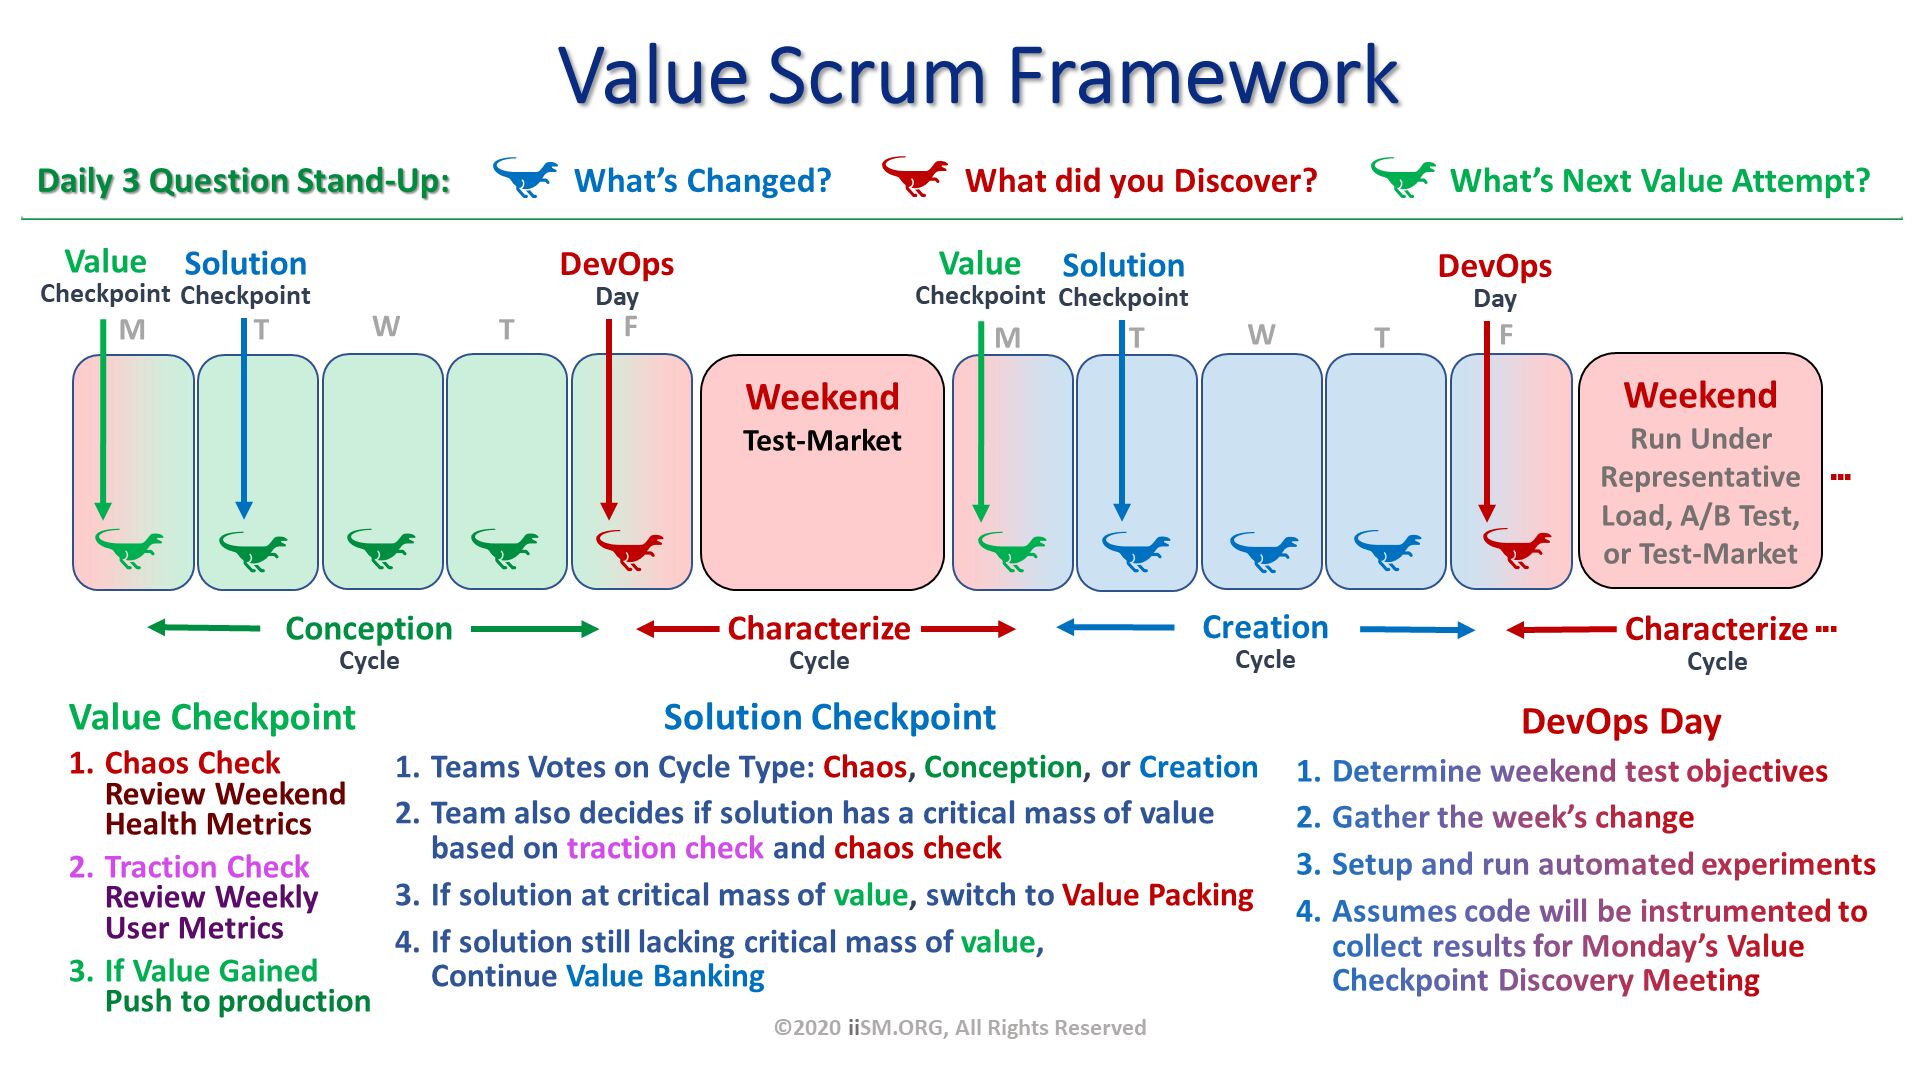 Value Checkpoint
Chaos Check Review Weekend Health Metrics
Traction CheckReview Weekly User Metrics
If Value Gained Push to production. Solution Checkpoint
Teams Votes on Cycle Type: Chaos, Conception, or Creation
Team also decides if solution has a critical mass of value based on traction check and chaos check 
If solution at critical mass of value, switch to Value Packing
If solution still lacking critical mass of value, Continue Value Banking. Daily 3 Question Stand-Up:               What’s Changed?                What did you Discover?                What’s Next Value Attempt?   . DevOps Day
Determine weekend test objectives
Gather the week’s change
Setup and run automated experiments
Assumes code will be instrumented to collect results for Monday’s Value Checkpoint Discovery Meeting. Value Scrum Framework. ©2020 iiSM.ORG, All Rights Reserved. 